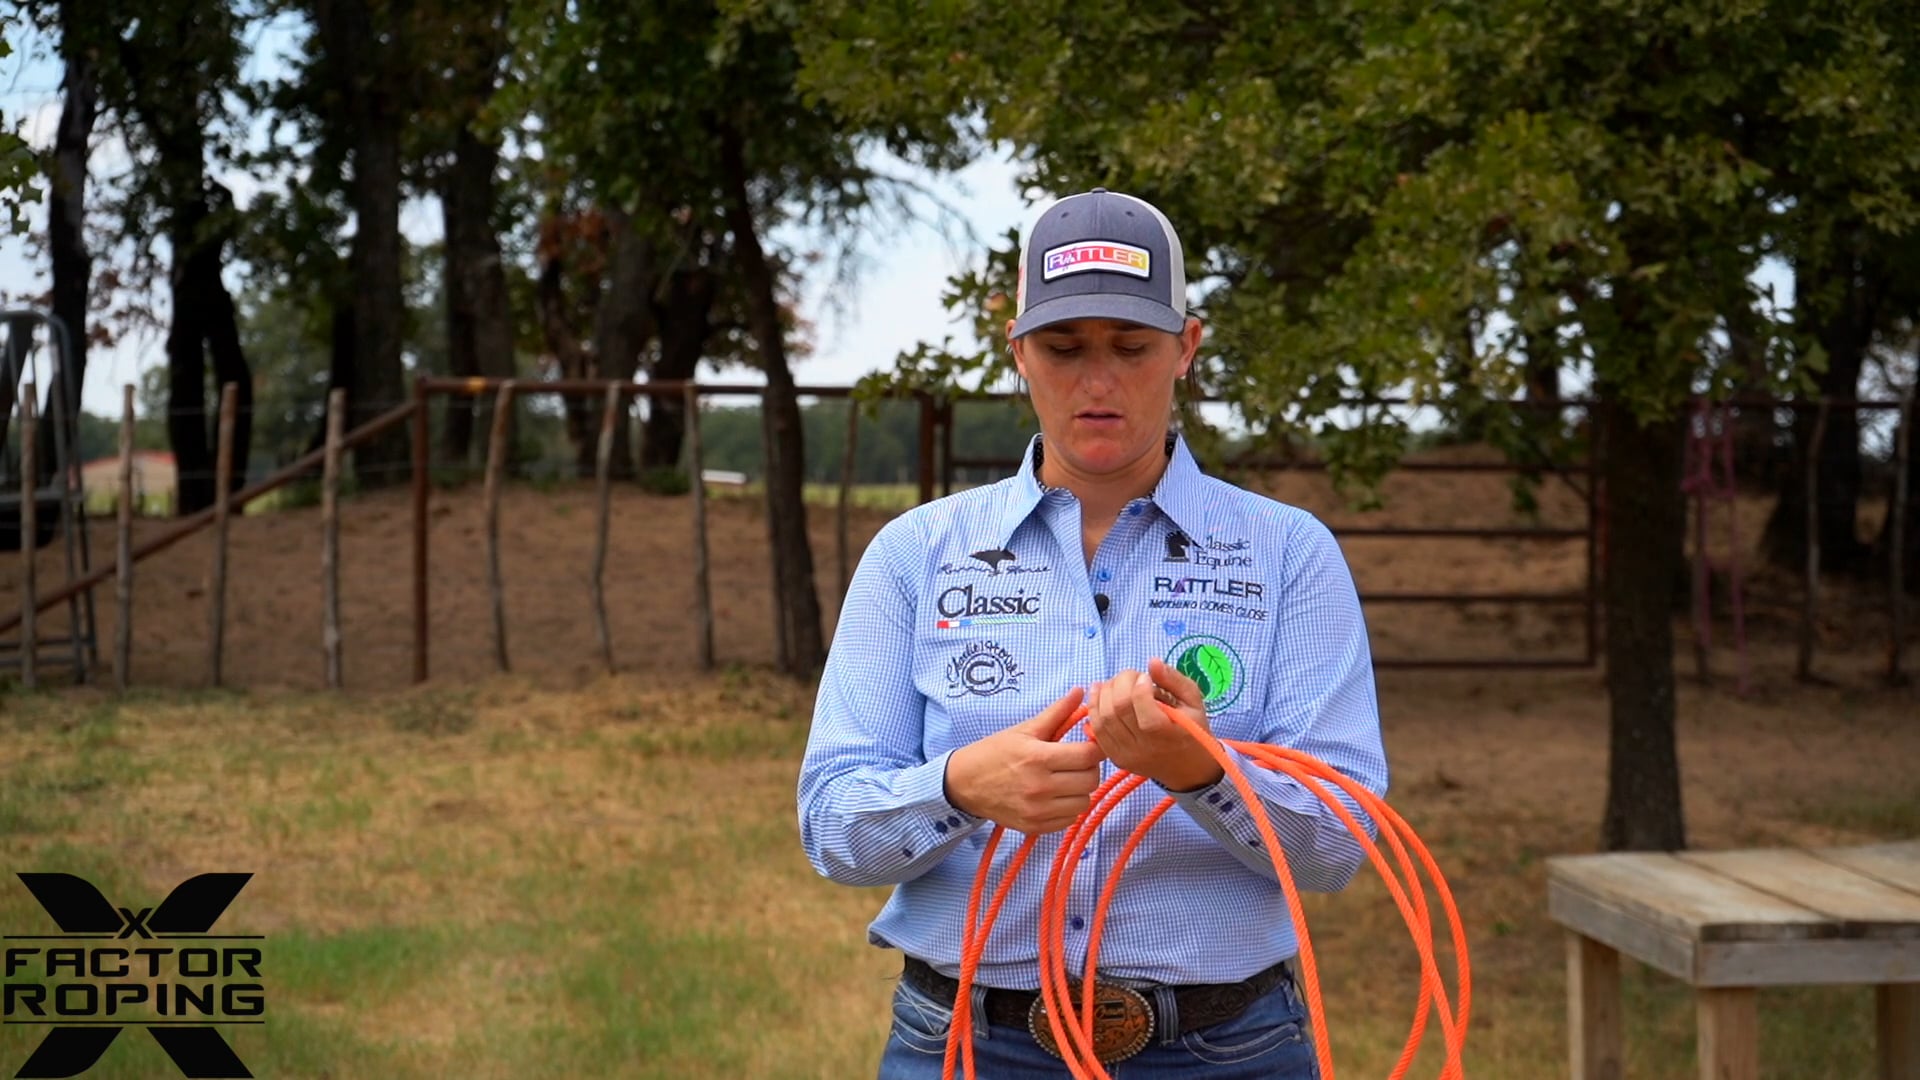 OTT Rope Suggestions with Kelsie Chace